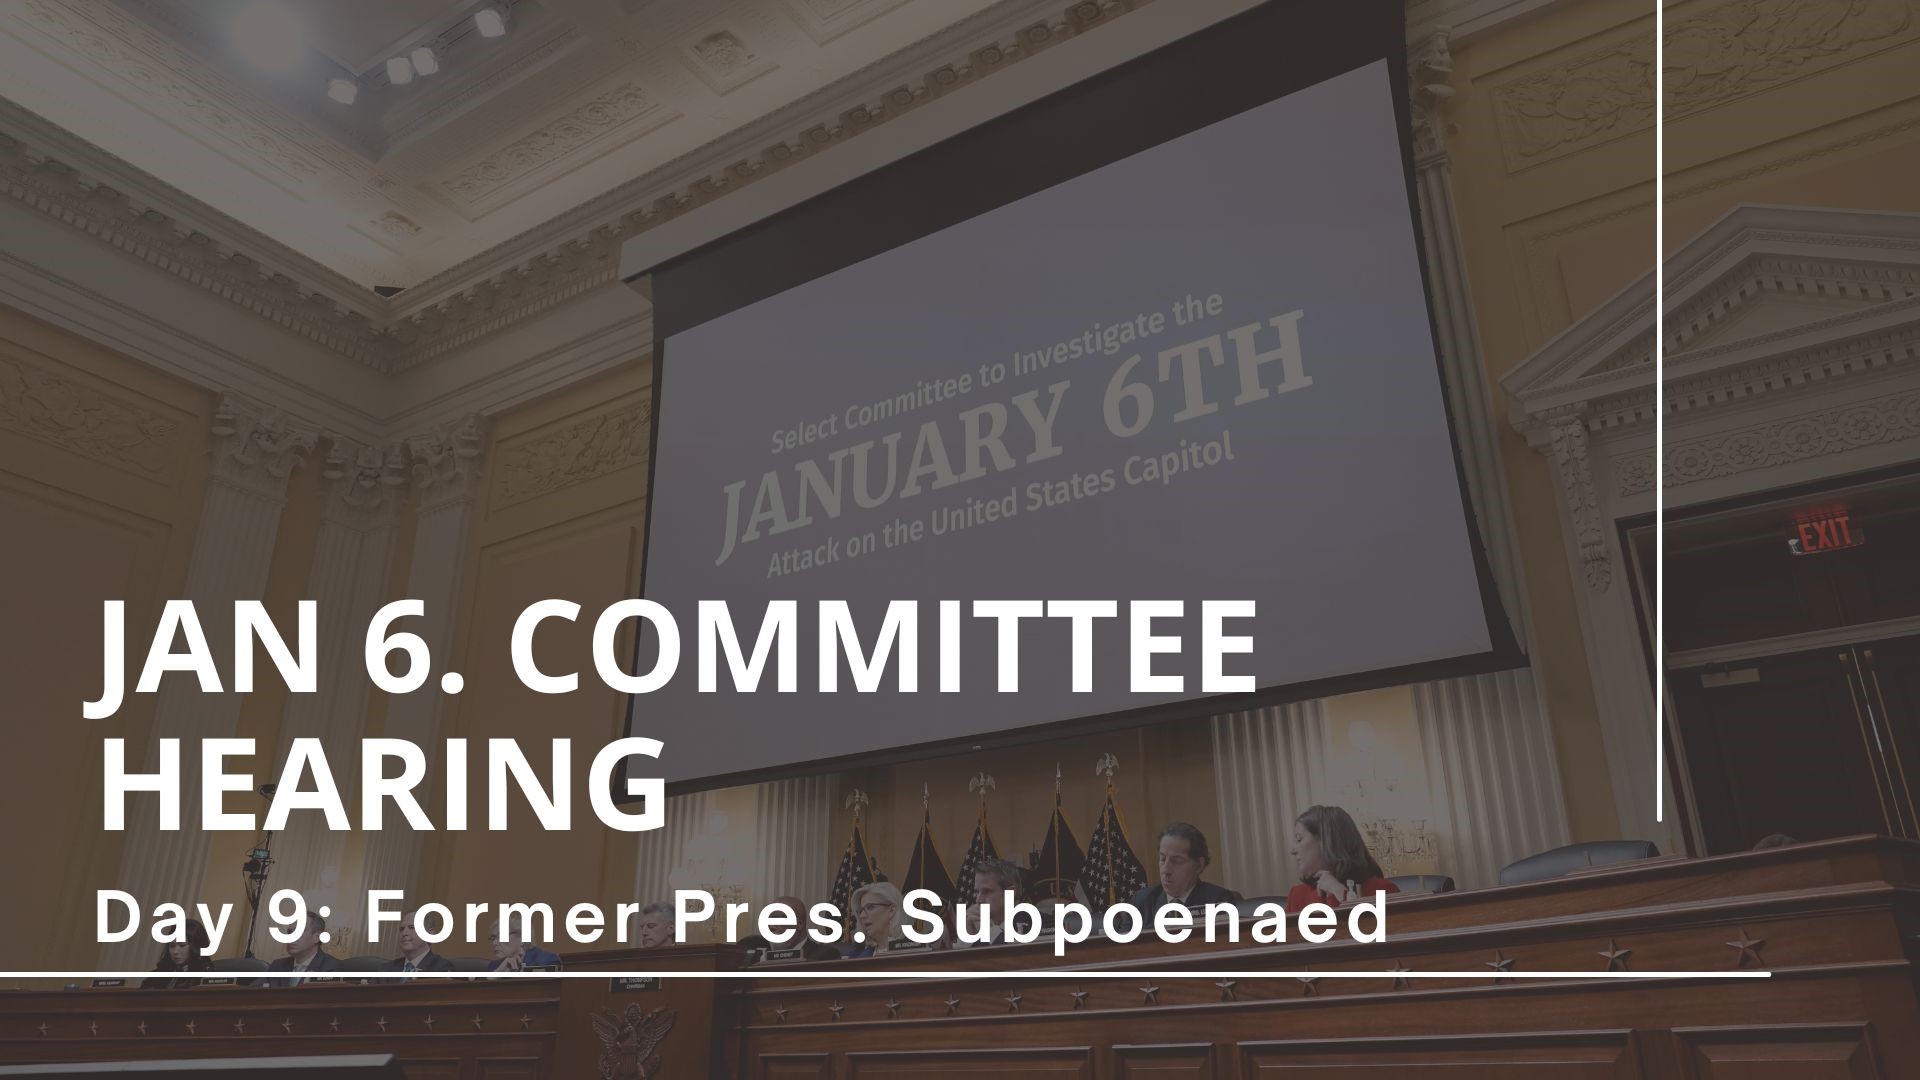 Day 9 of the Jan. 6 hearings featuring new evidence and a subpoena for former President Trump. (Part 1 of 2)